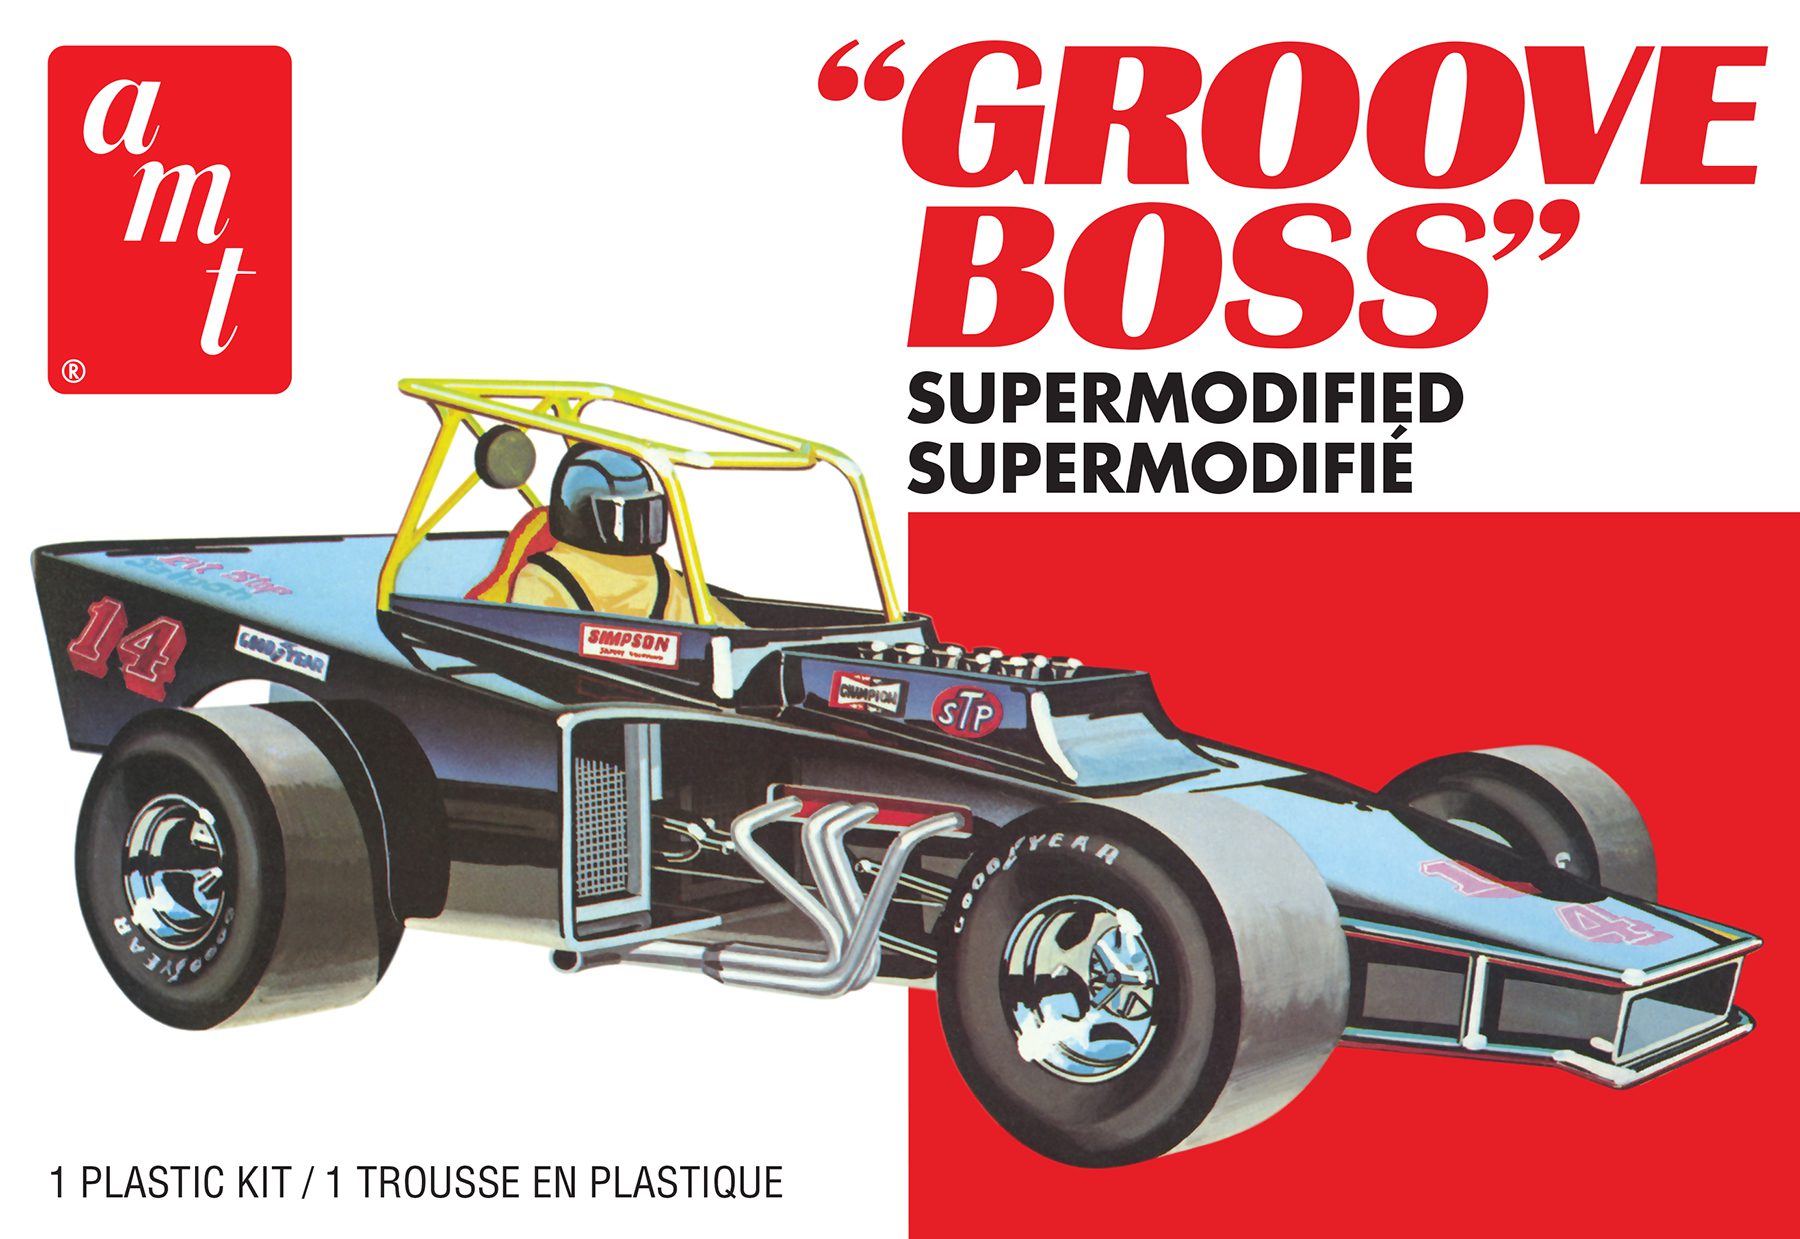 1/25 "Groove Boss" Supermodified Racer